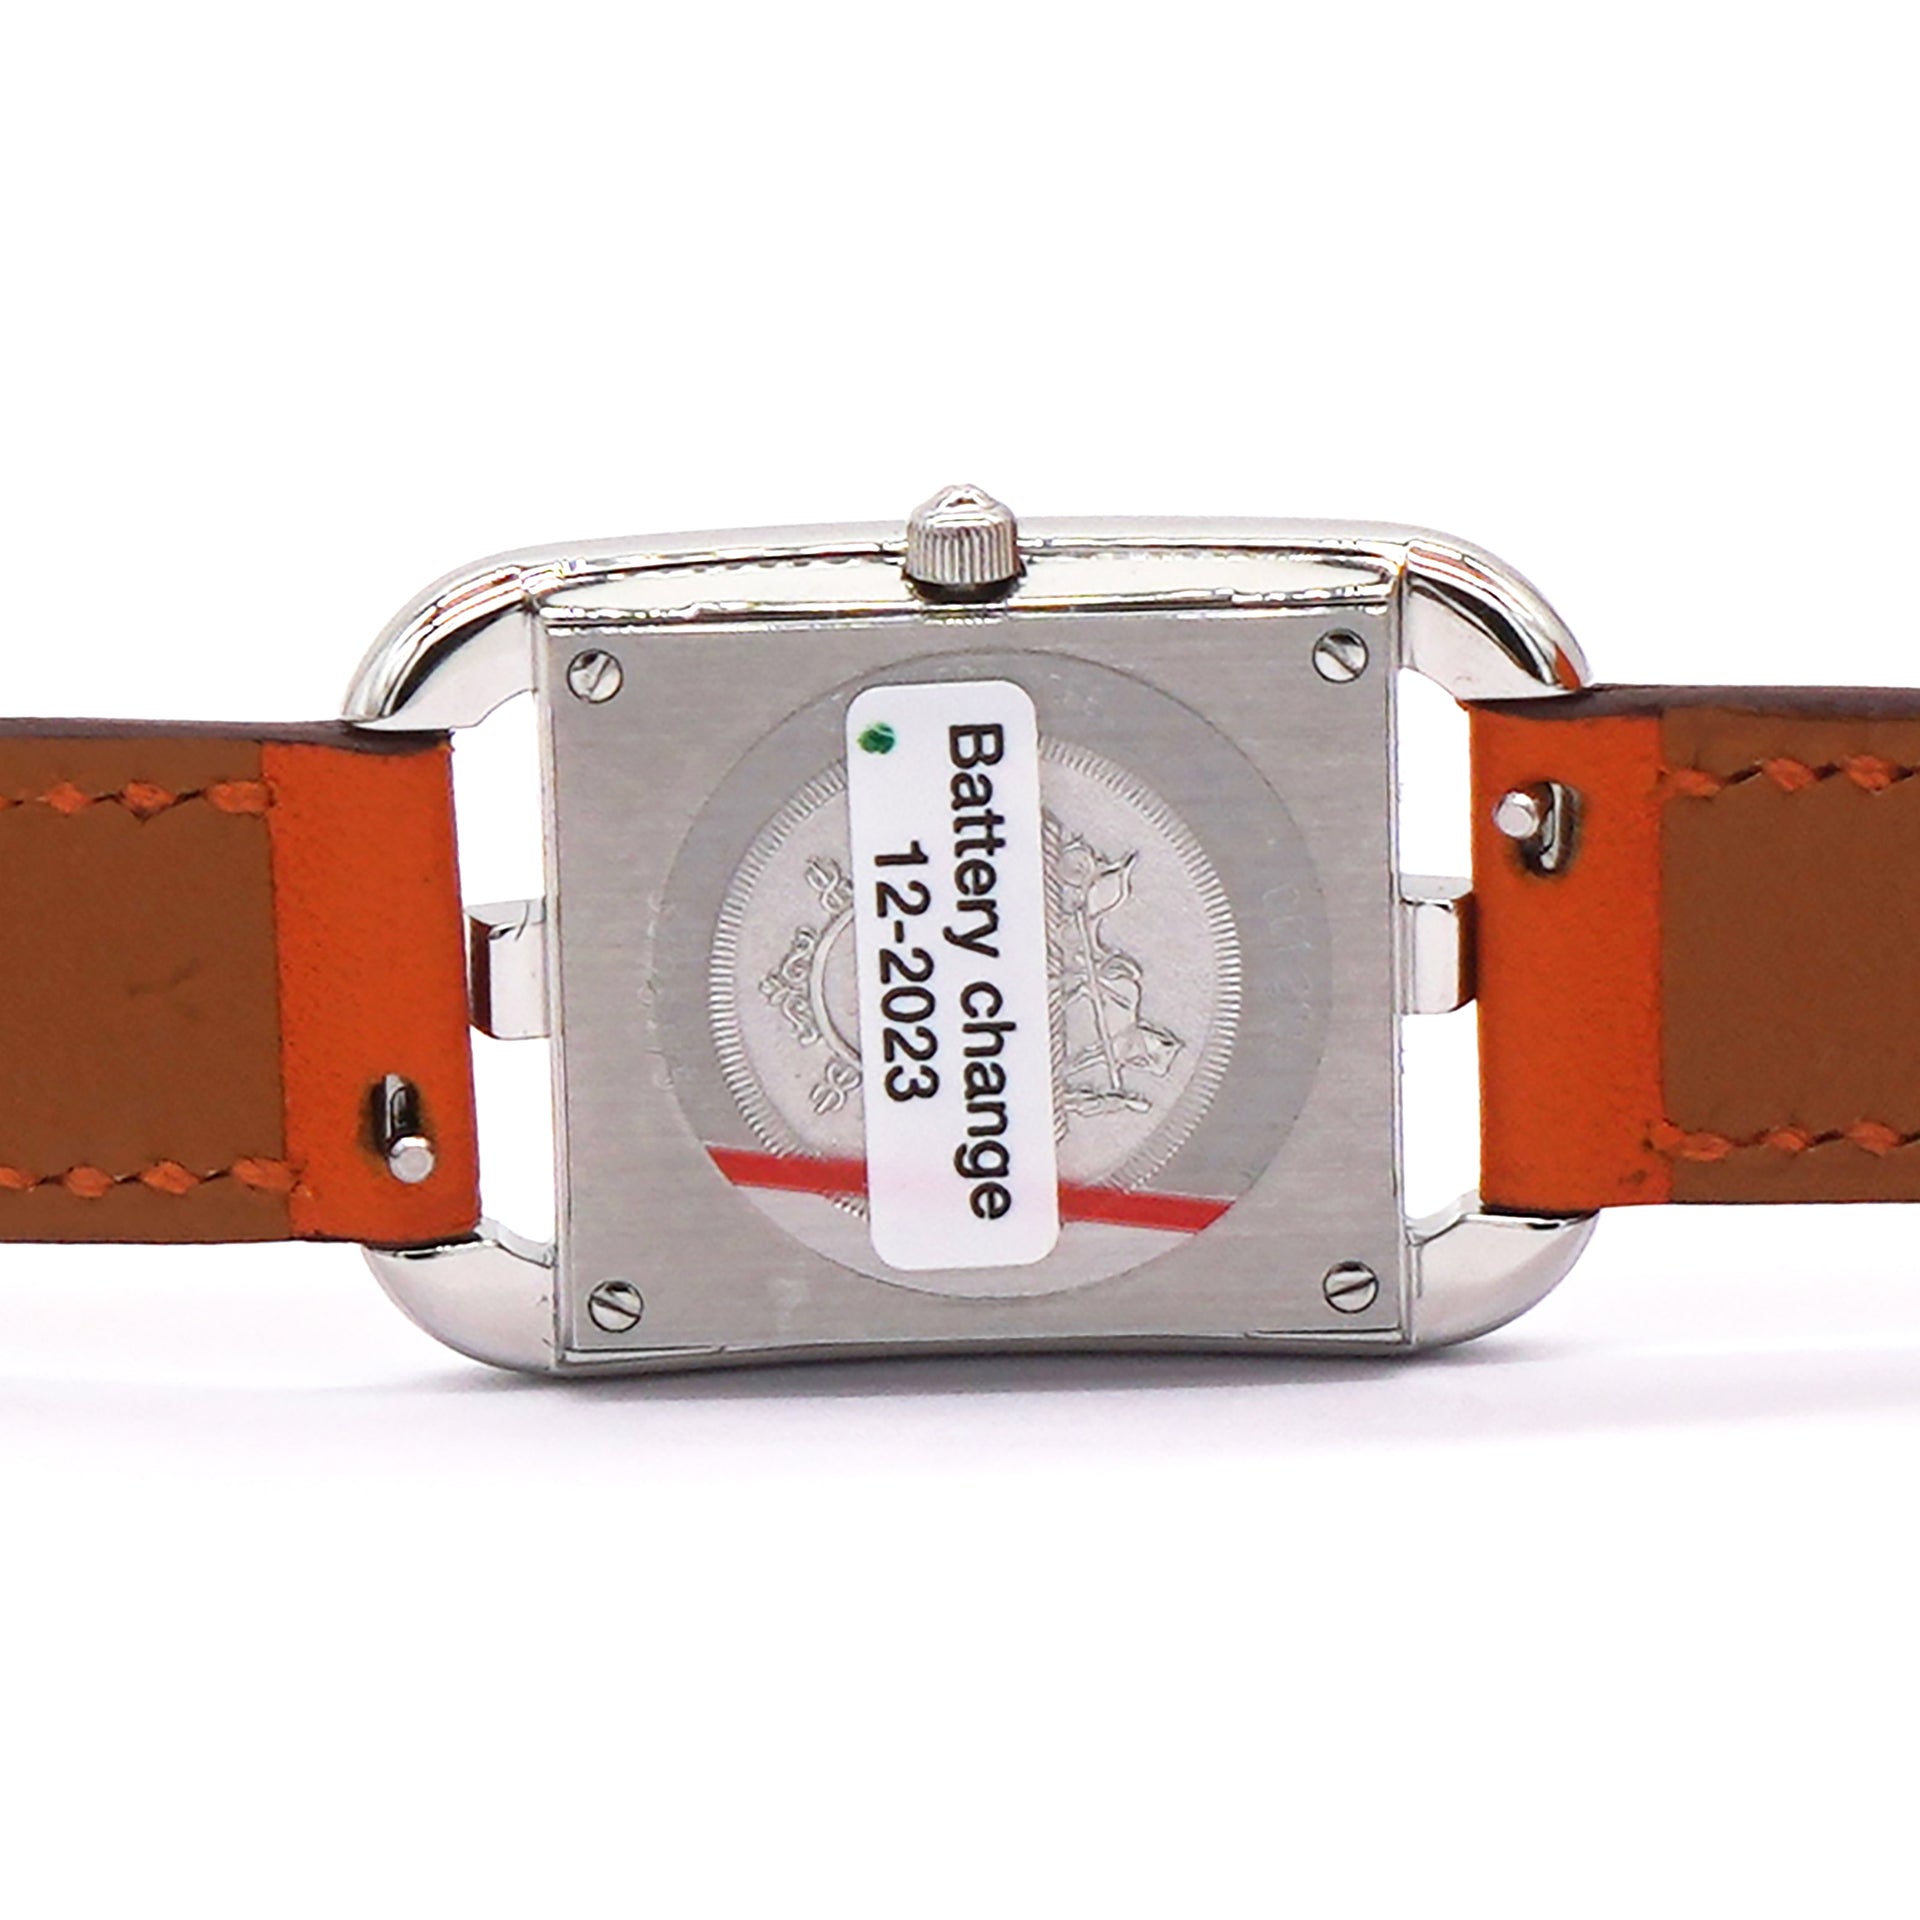 Hermès Cape Cod Watch Collection Adds New Models